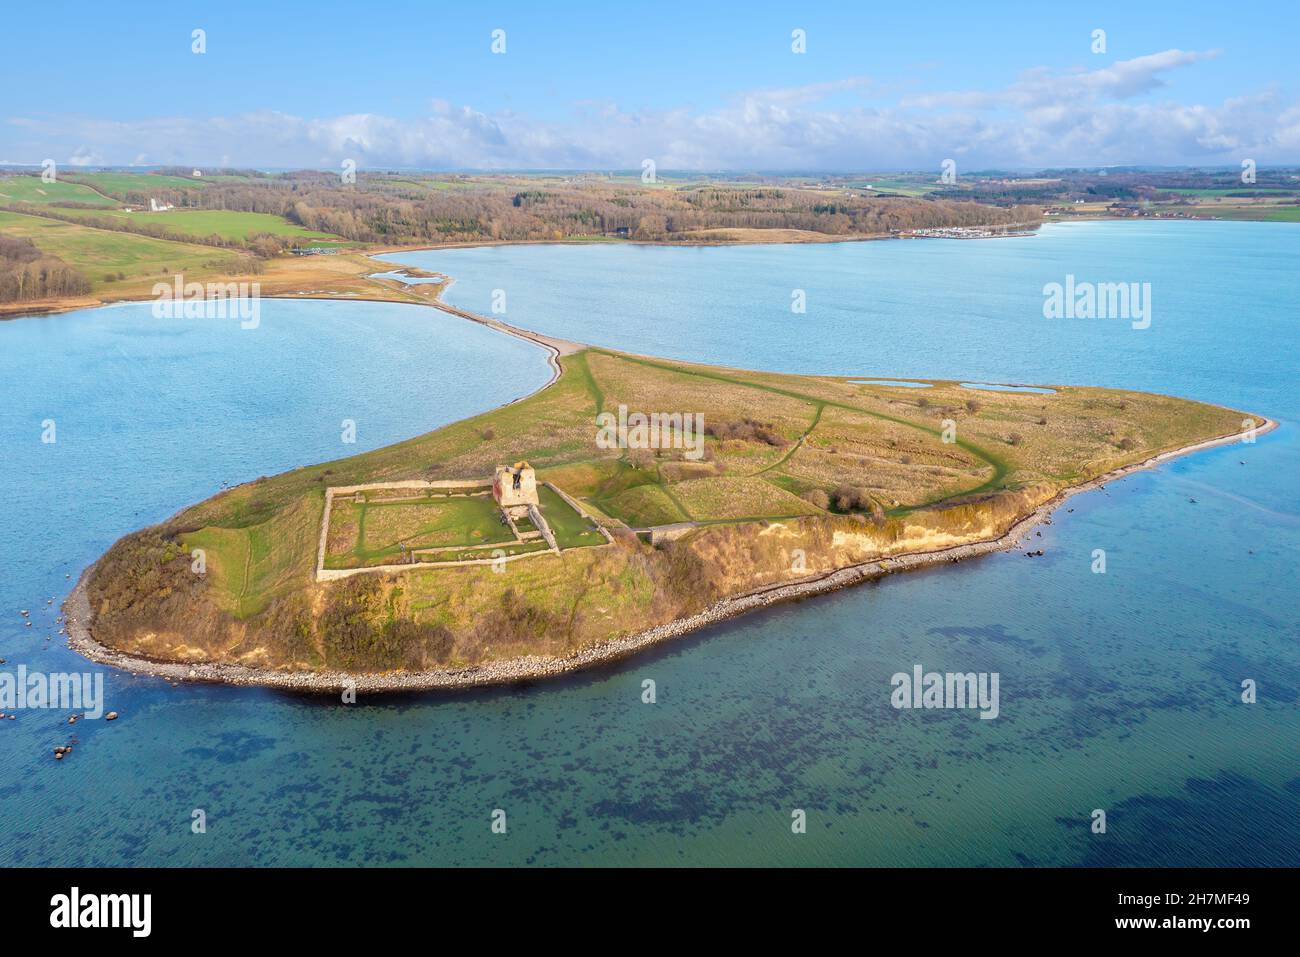 Jutland, Denmark - November 20, 2021 - Kalø castle was constructed in 1313 and is located in eastern Jutland, Denmark, 20 km from the city of Aarhus. Stock Photo